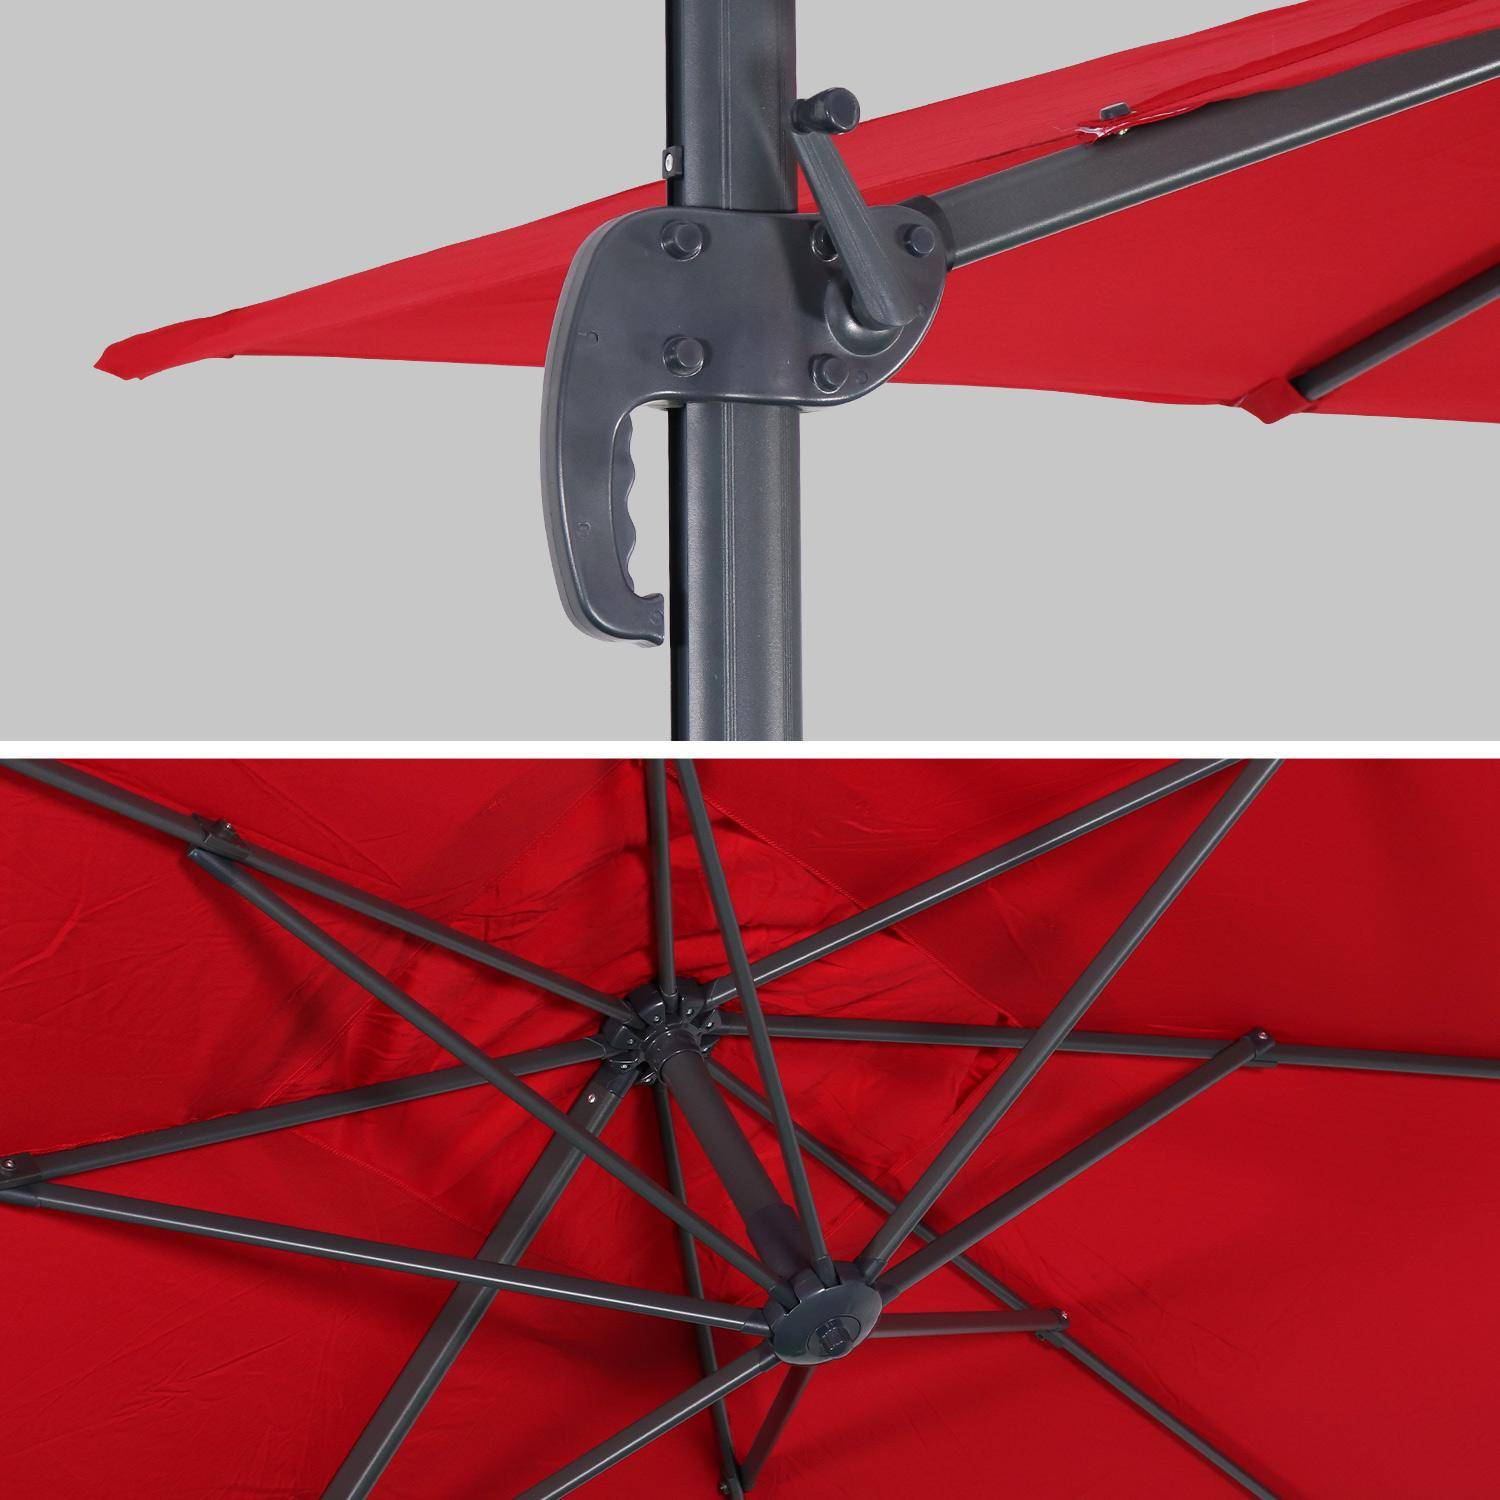 2x3m rectangular cantilever paraso - parasol can be tilted, folded and rotated 360 degreesl - Antibes - Red,sweeek,Photo4